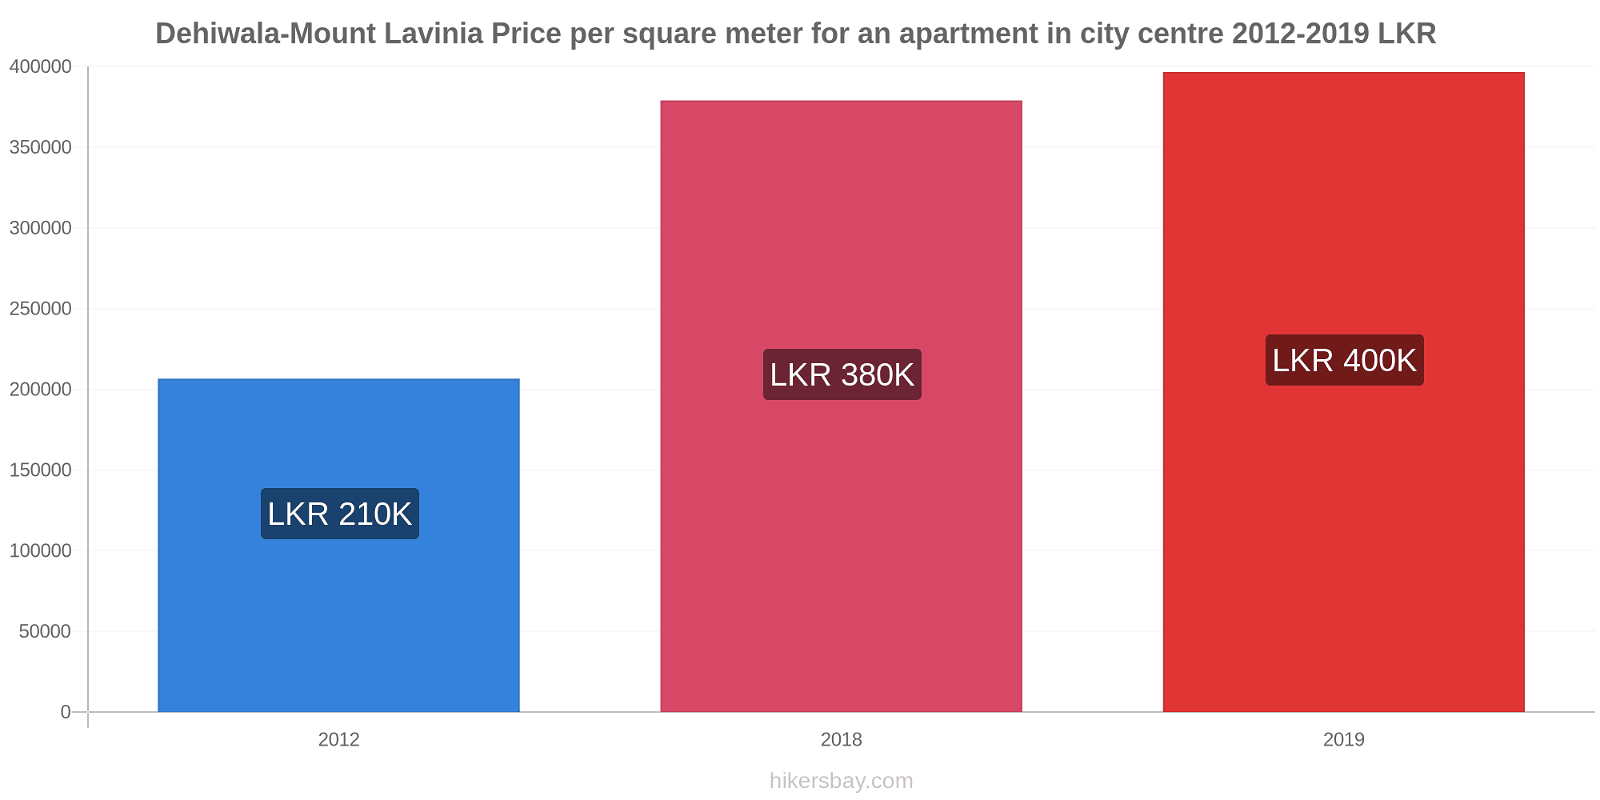 Dehiwala-Mount Lavinia price changes Price per square meter for an apartment in city centre hikersbay.com